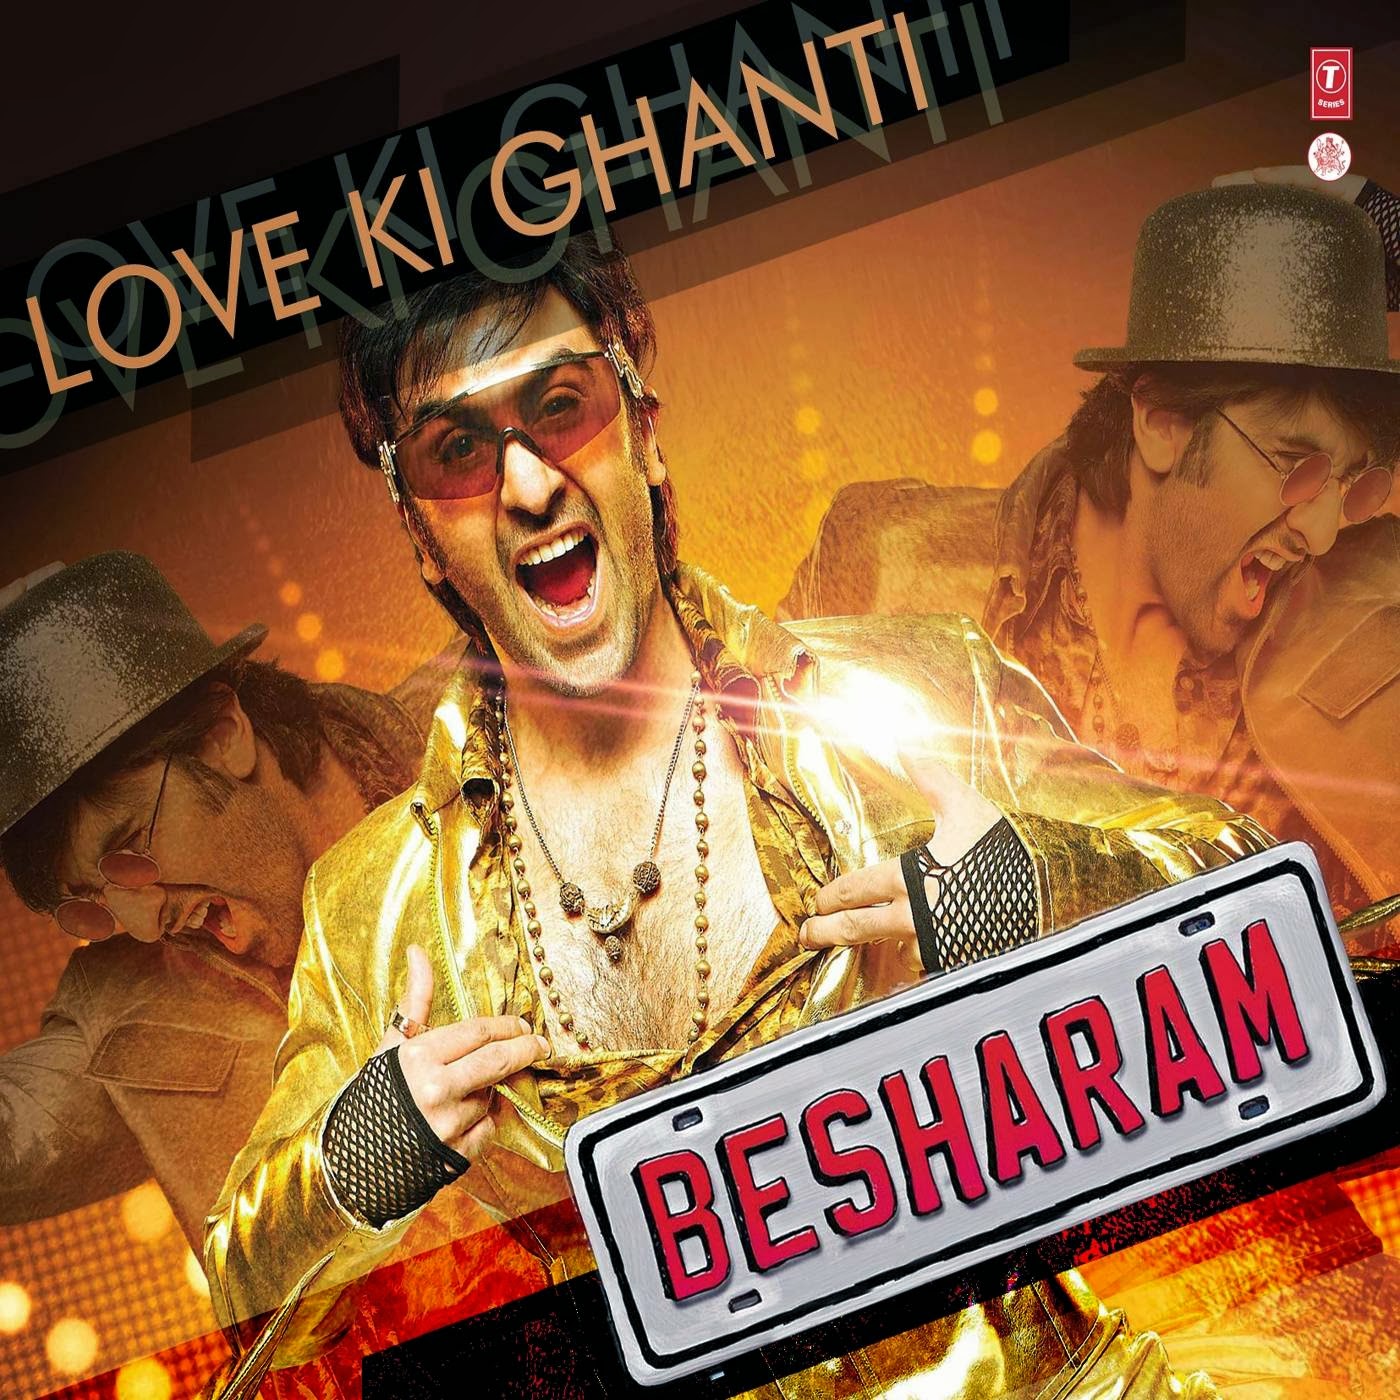 Besharam Movie Review - Top Fashion and Beauty: Fashion Trends, Health